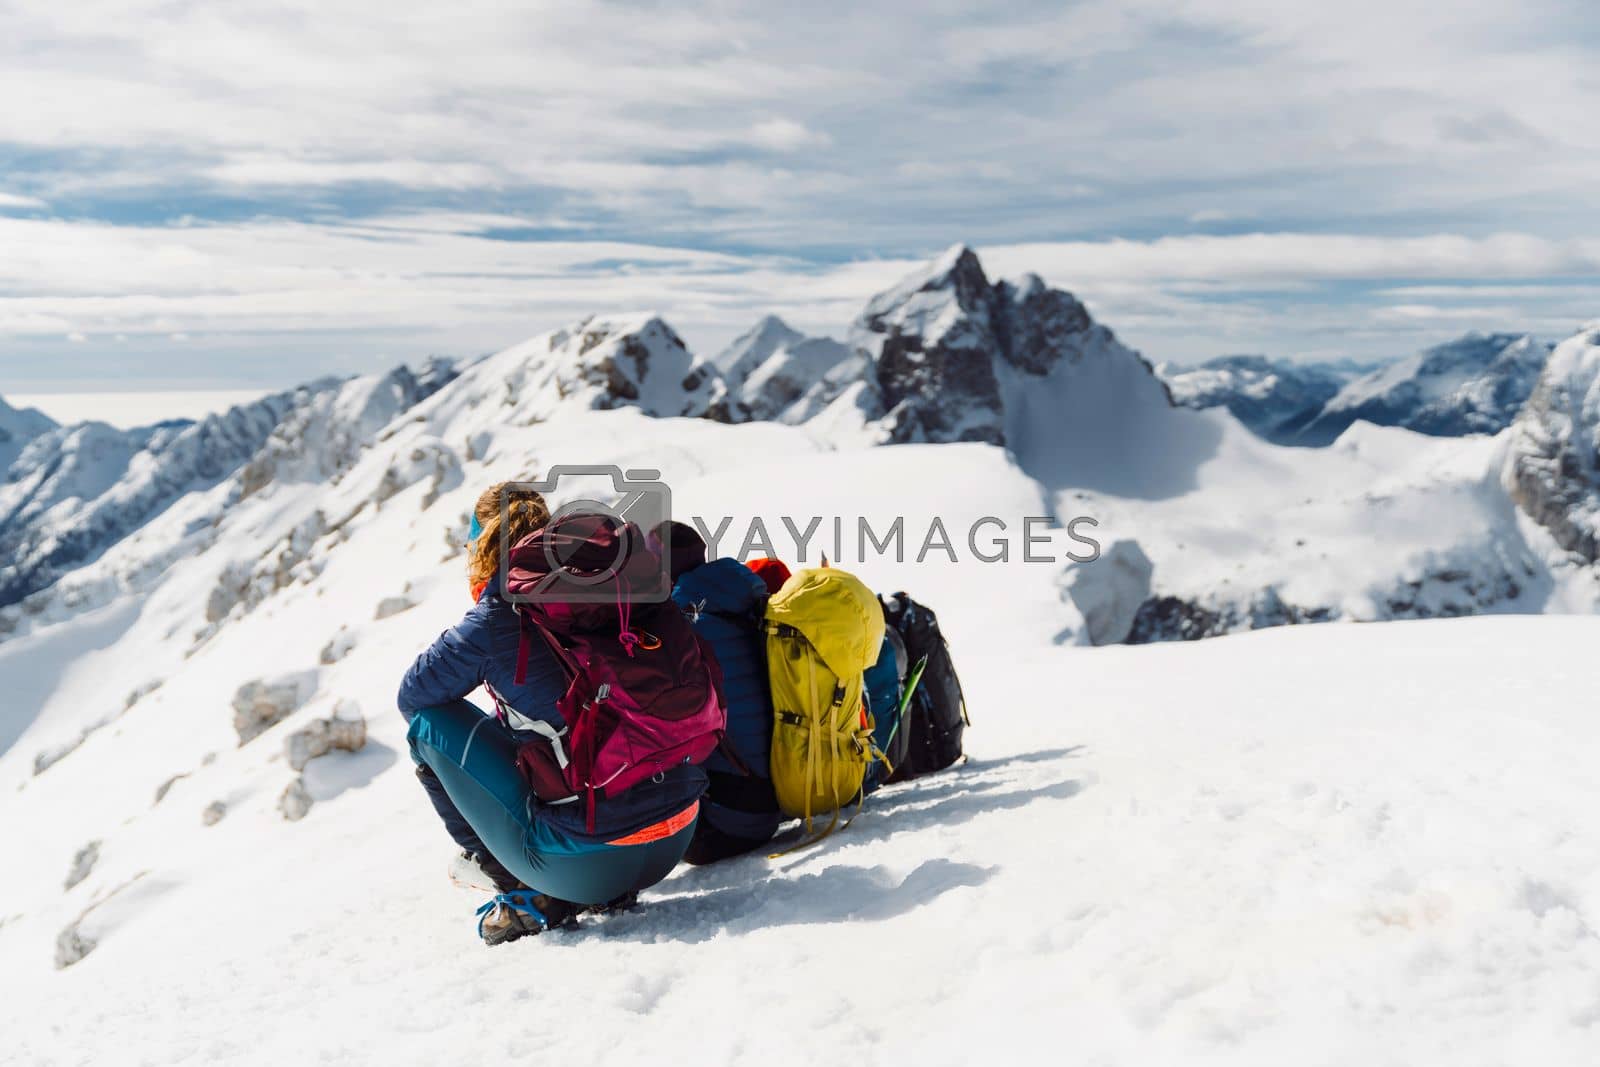 Royalty free image of Back view of hiking couple sitting in the snow enjoying the view of winter Alps from high up by VisualProductions